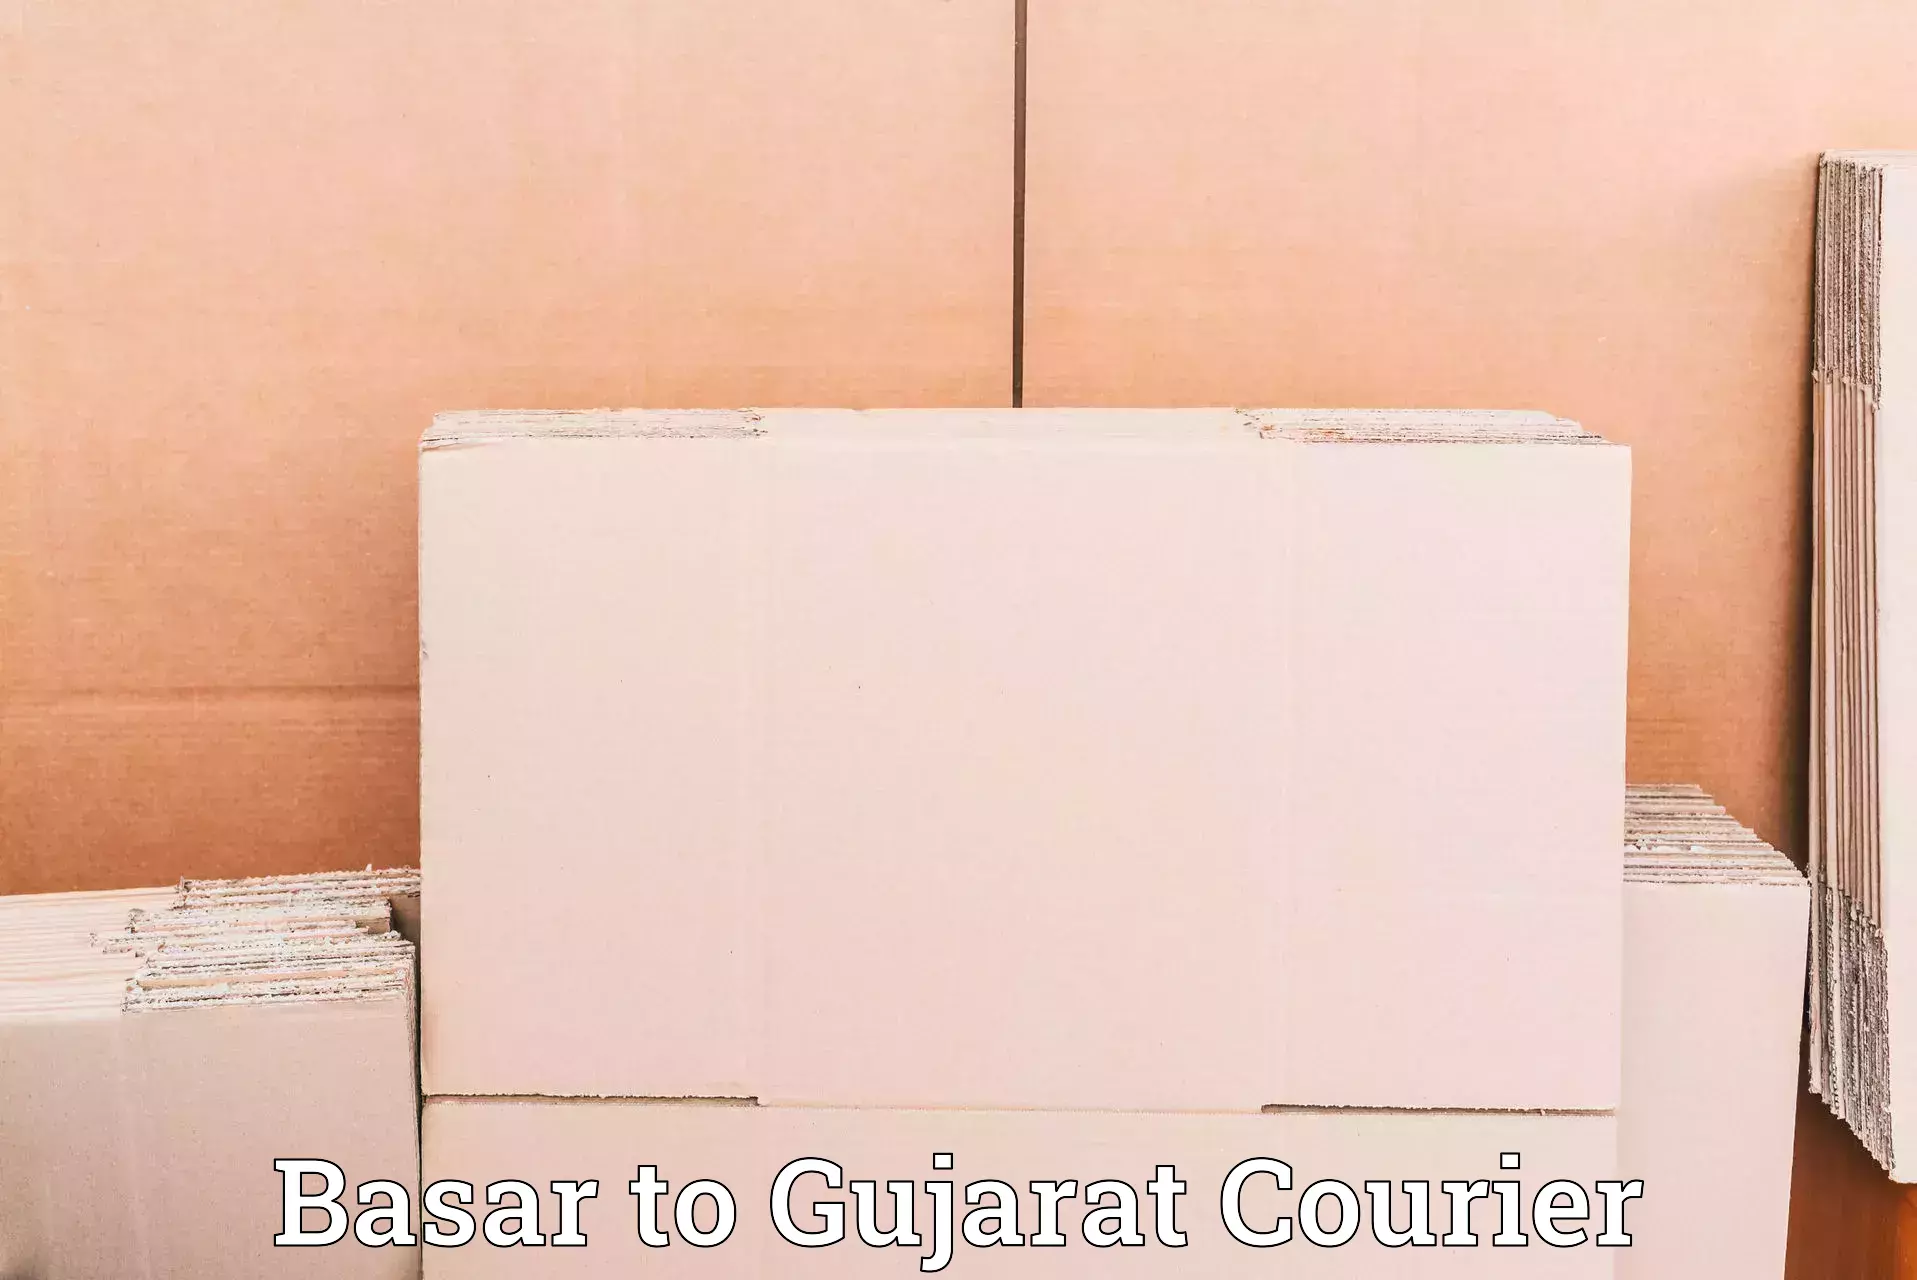 Customer-friendly courier services in Basar to Gujarat